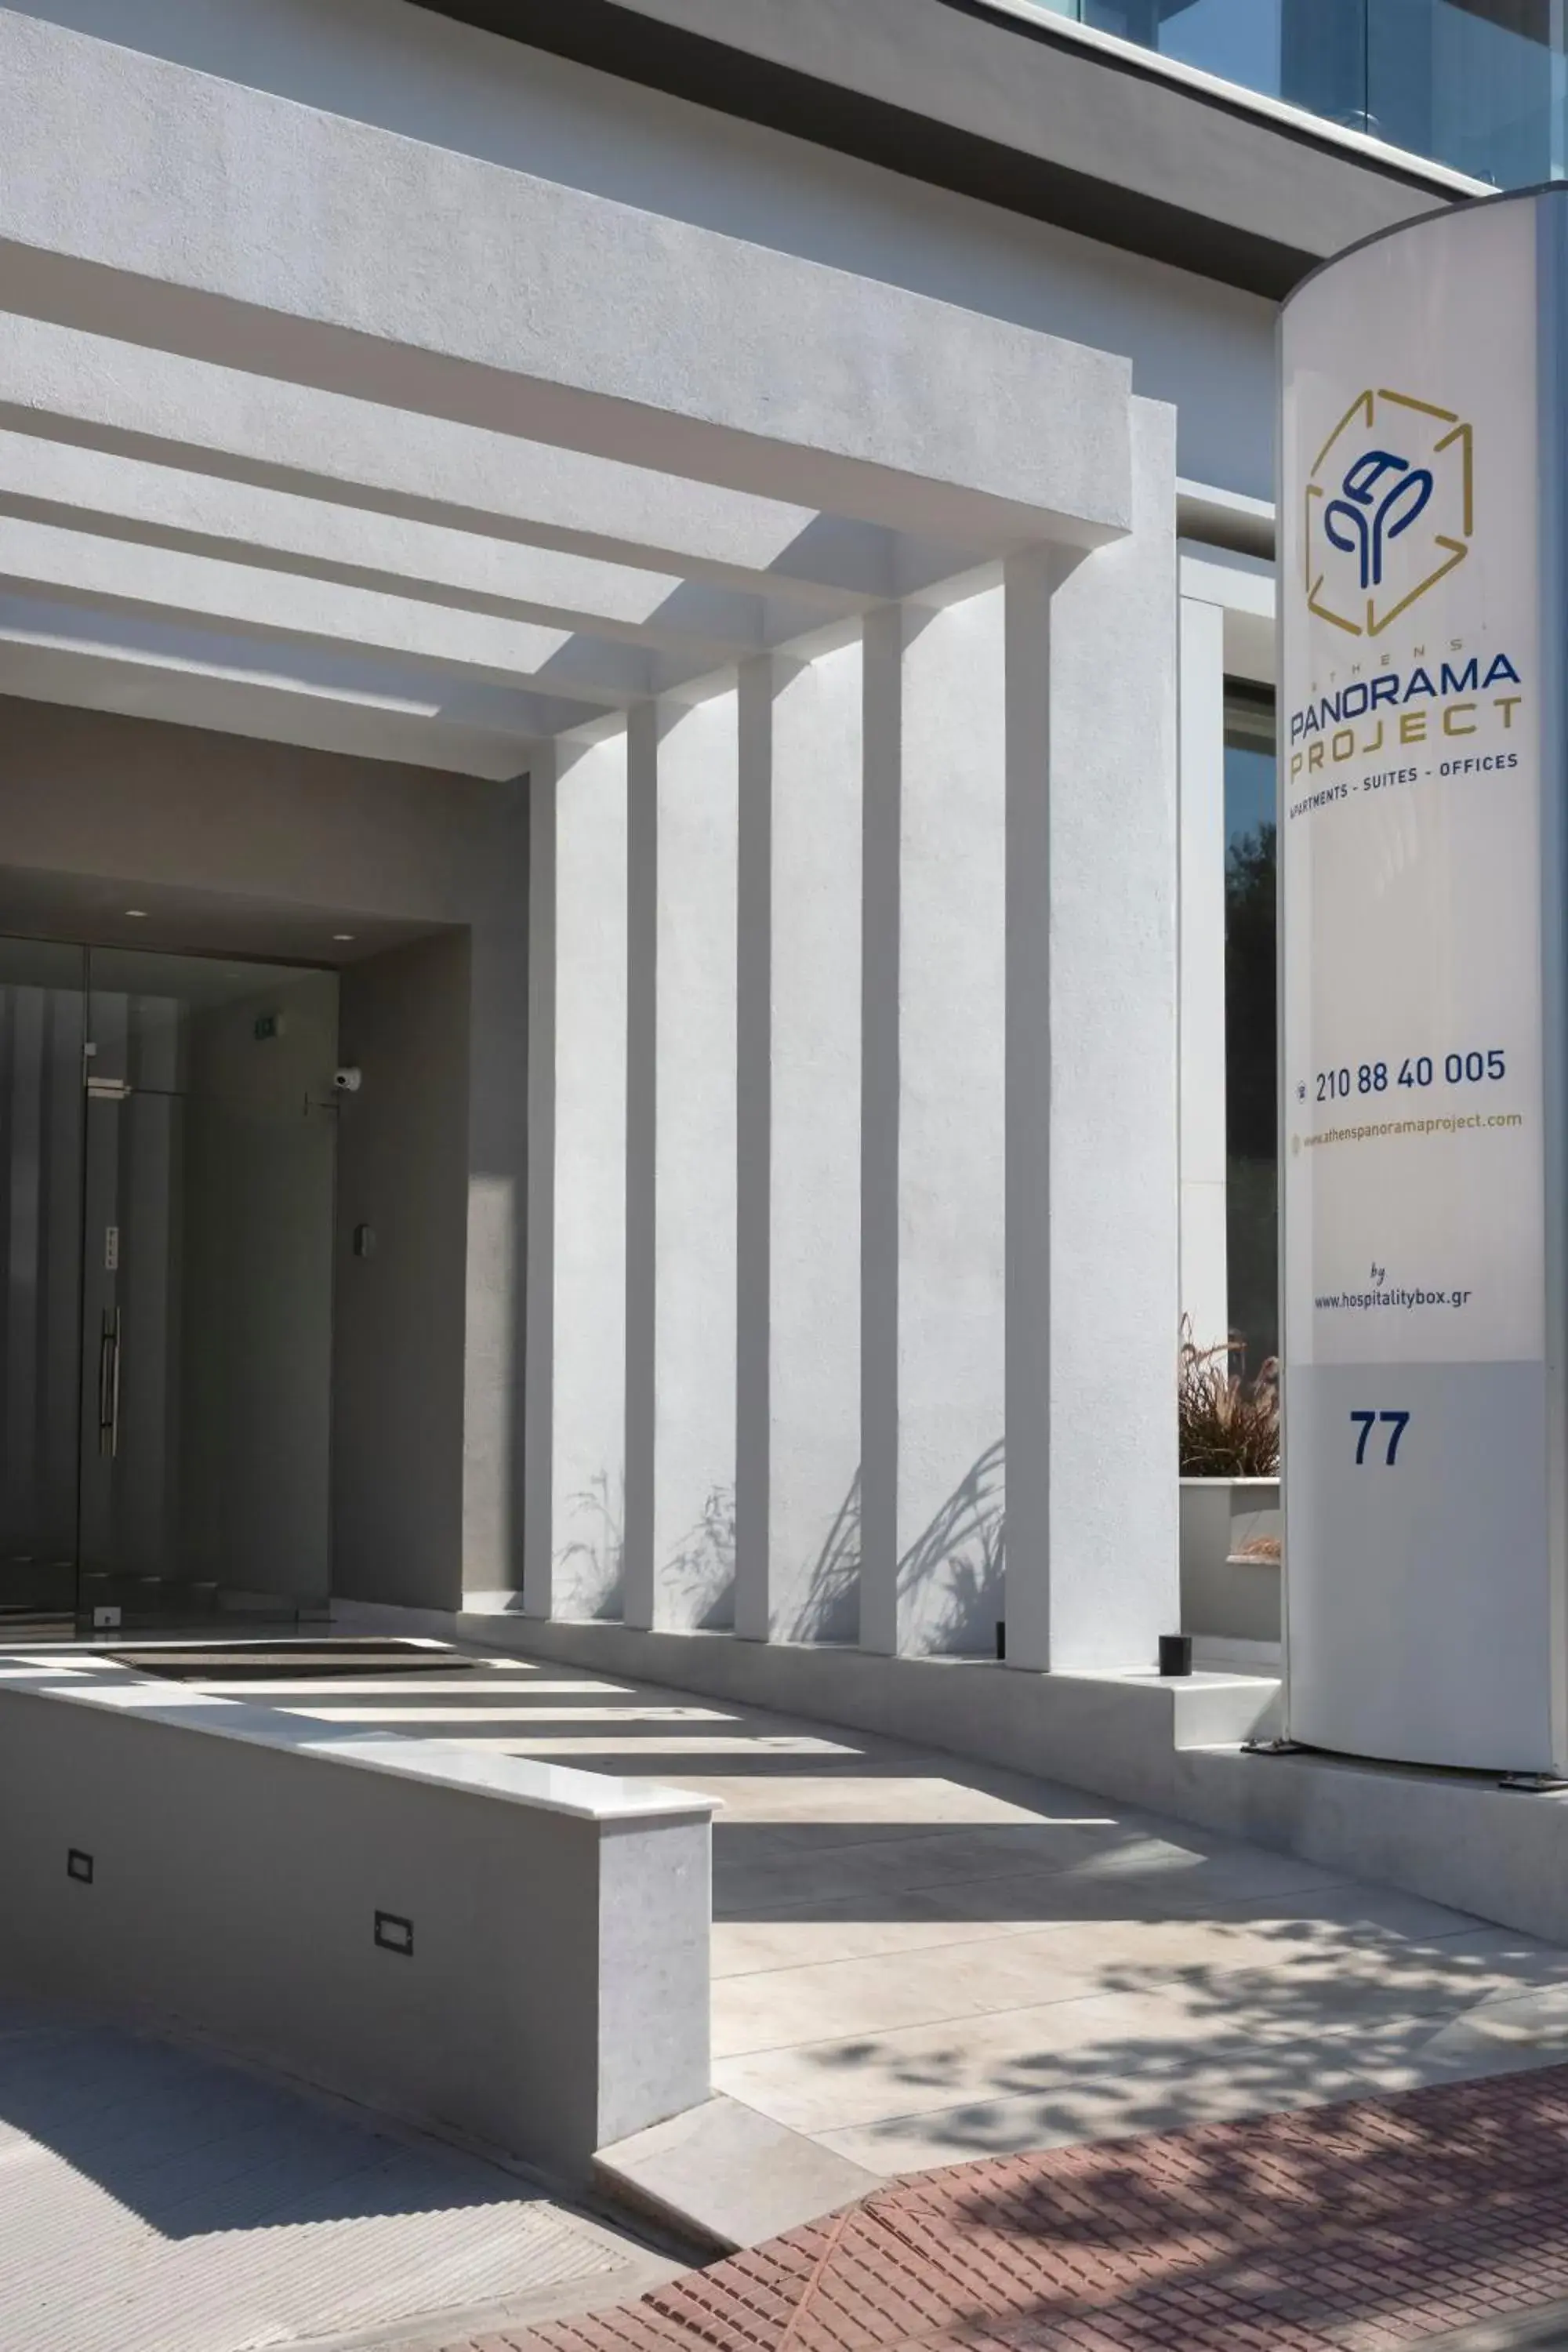 Facade/entrance in Athens Panorama Project